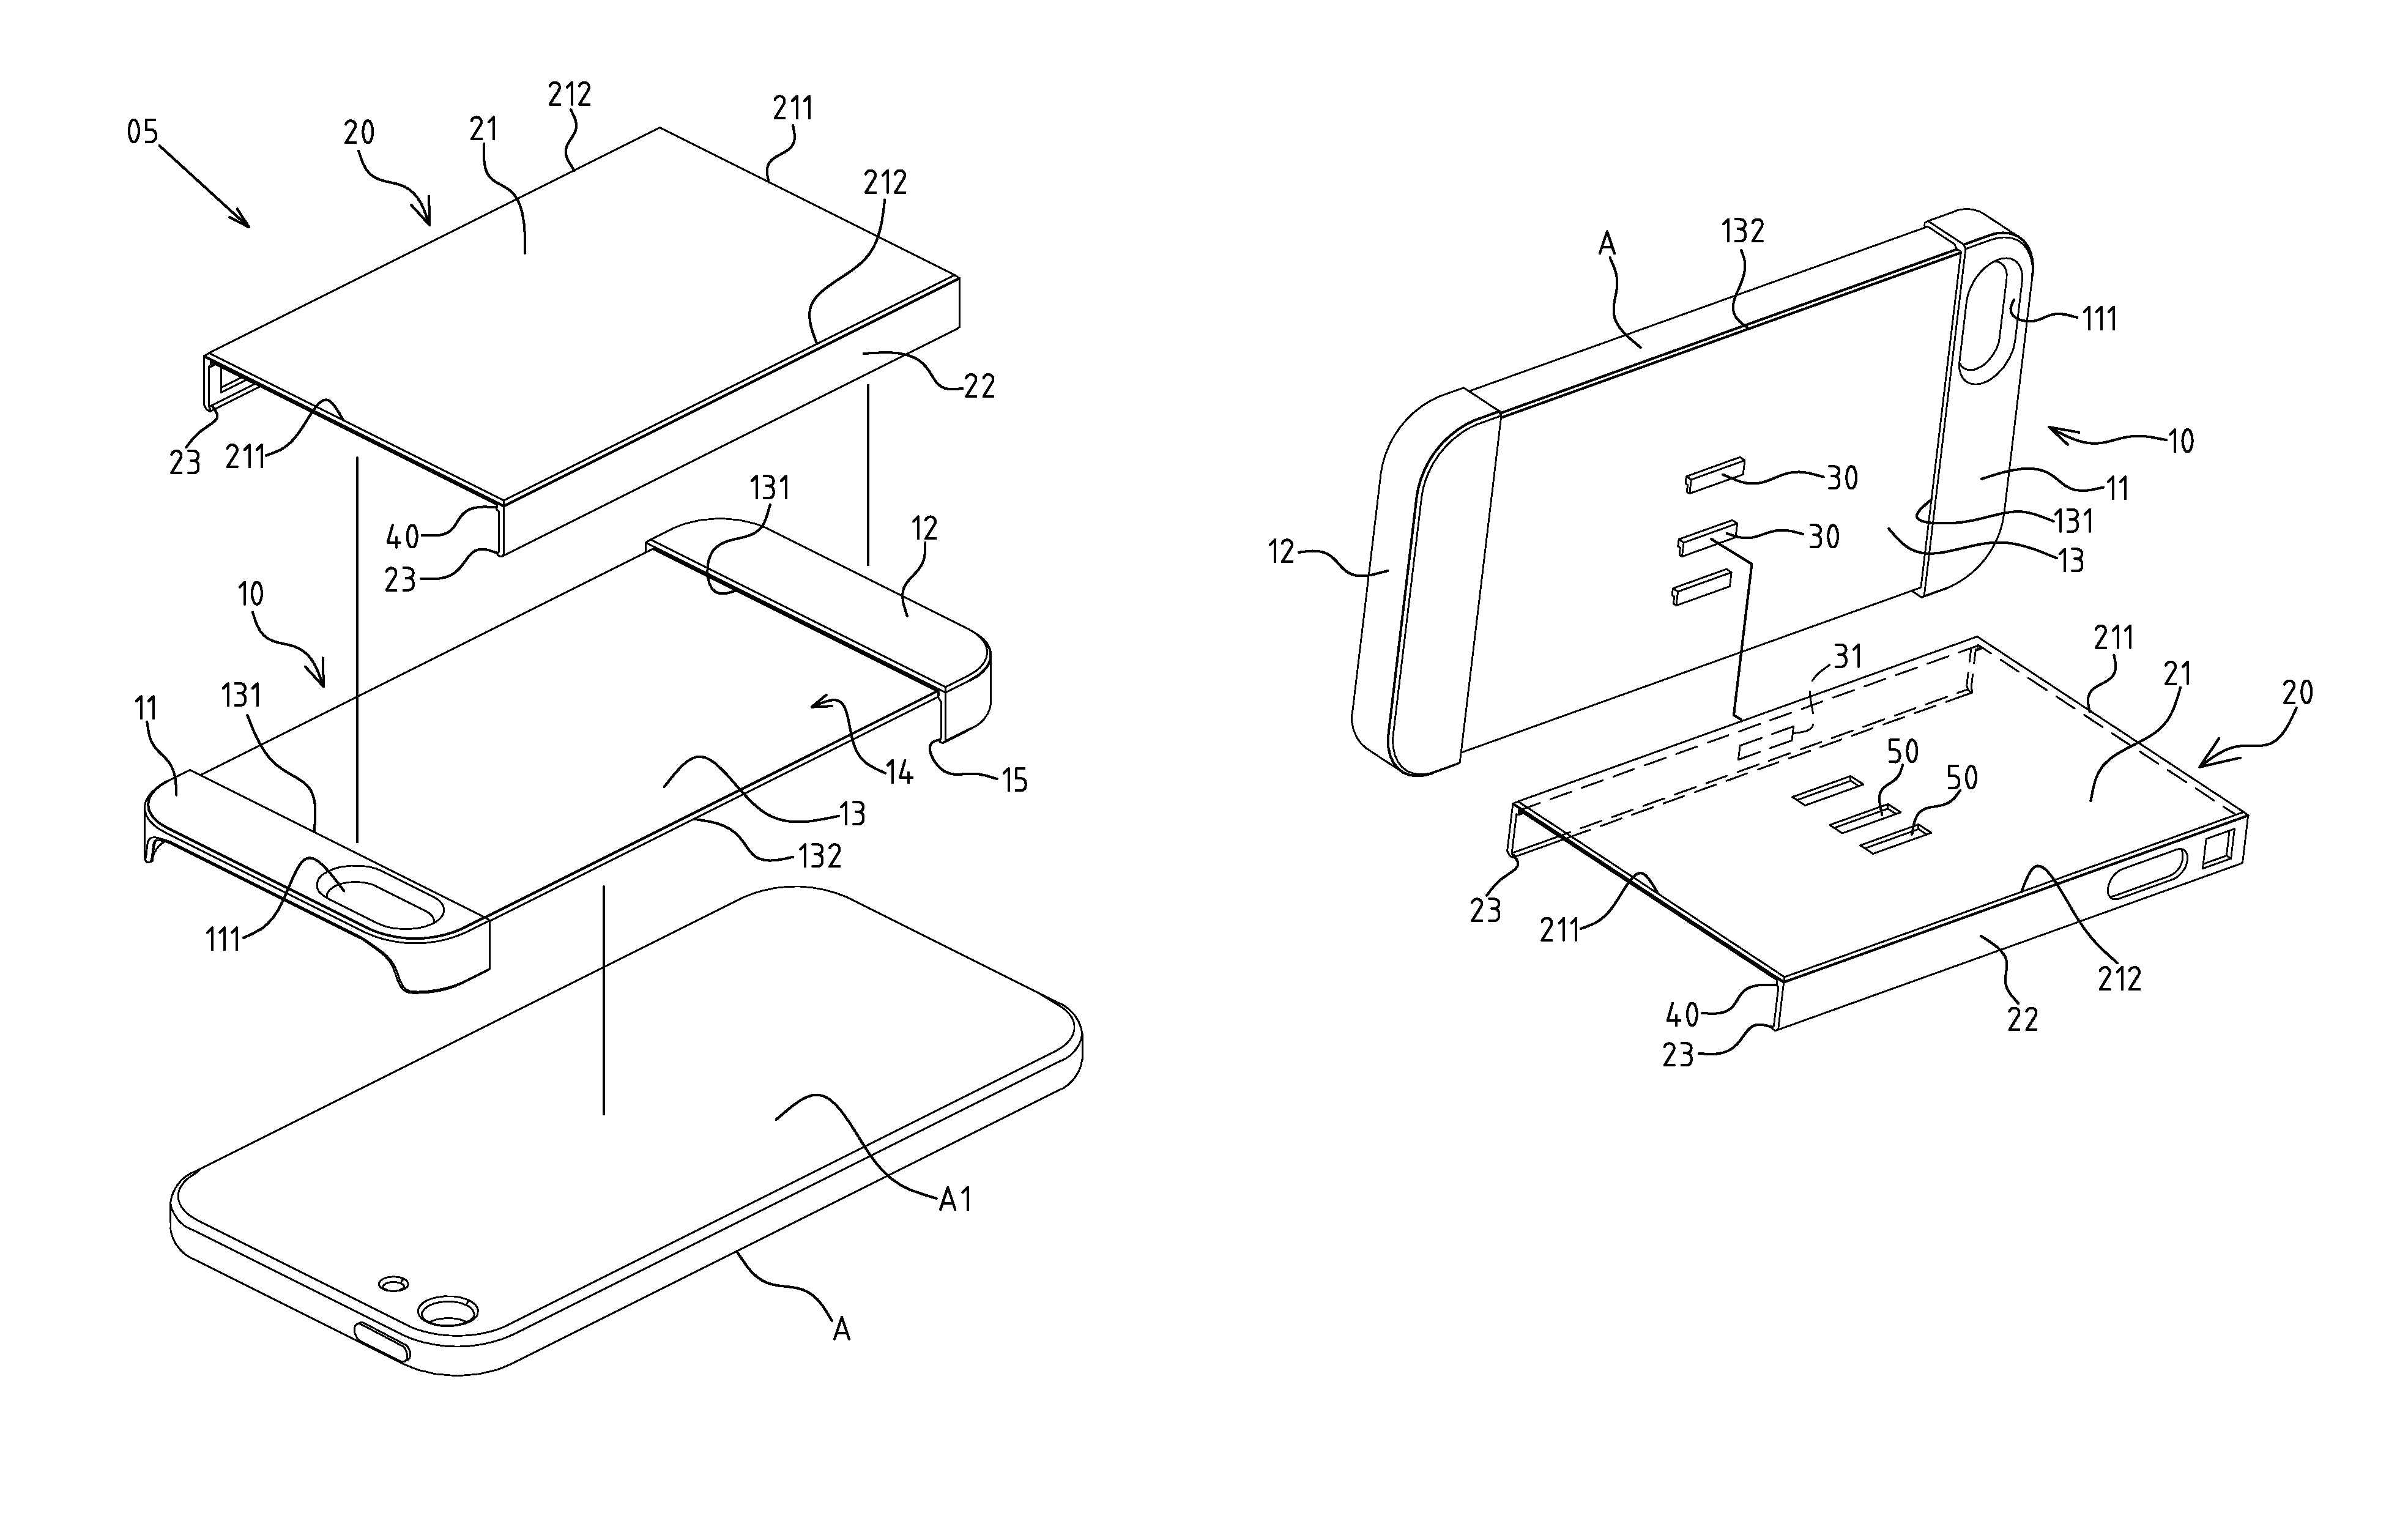 Protective housing assembly for electronic devices